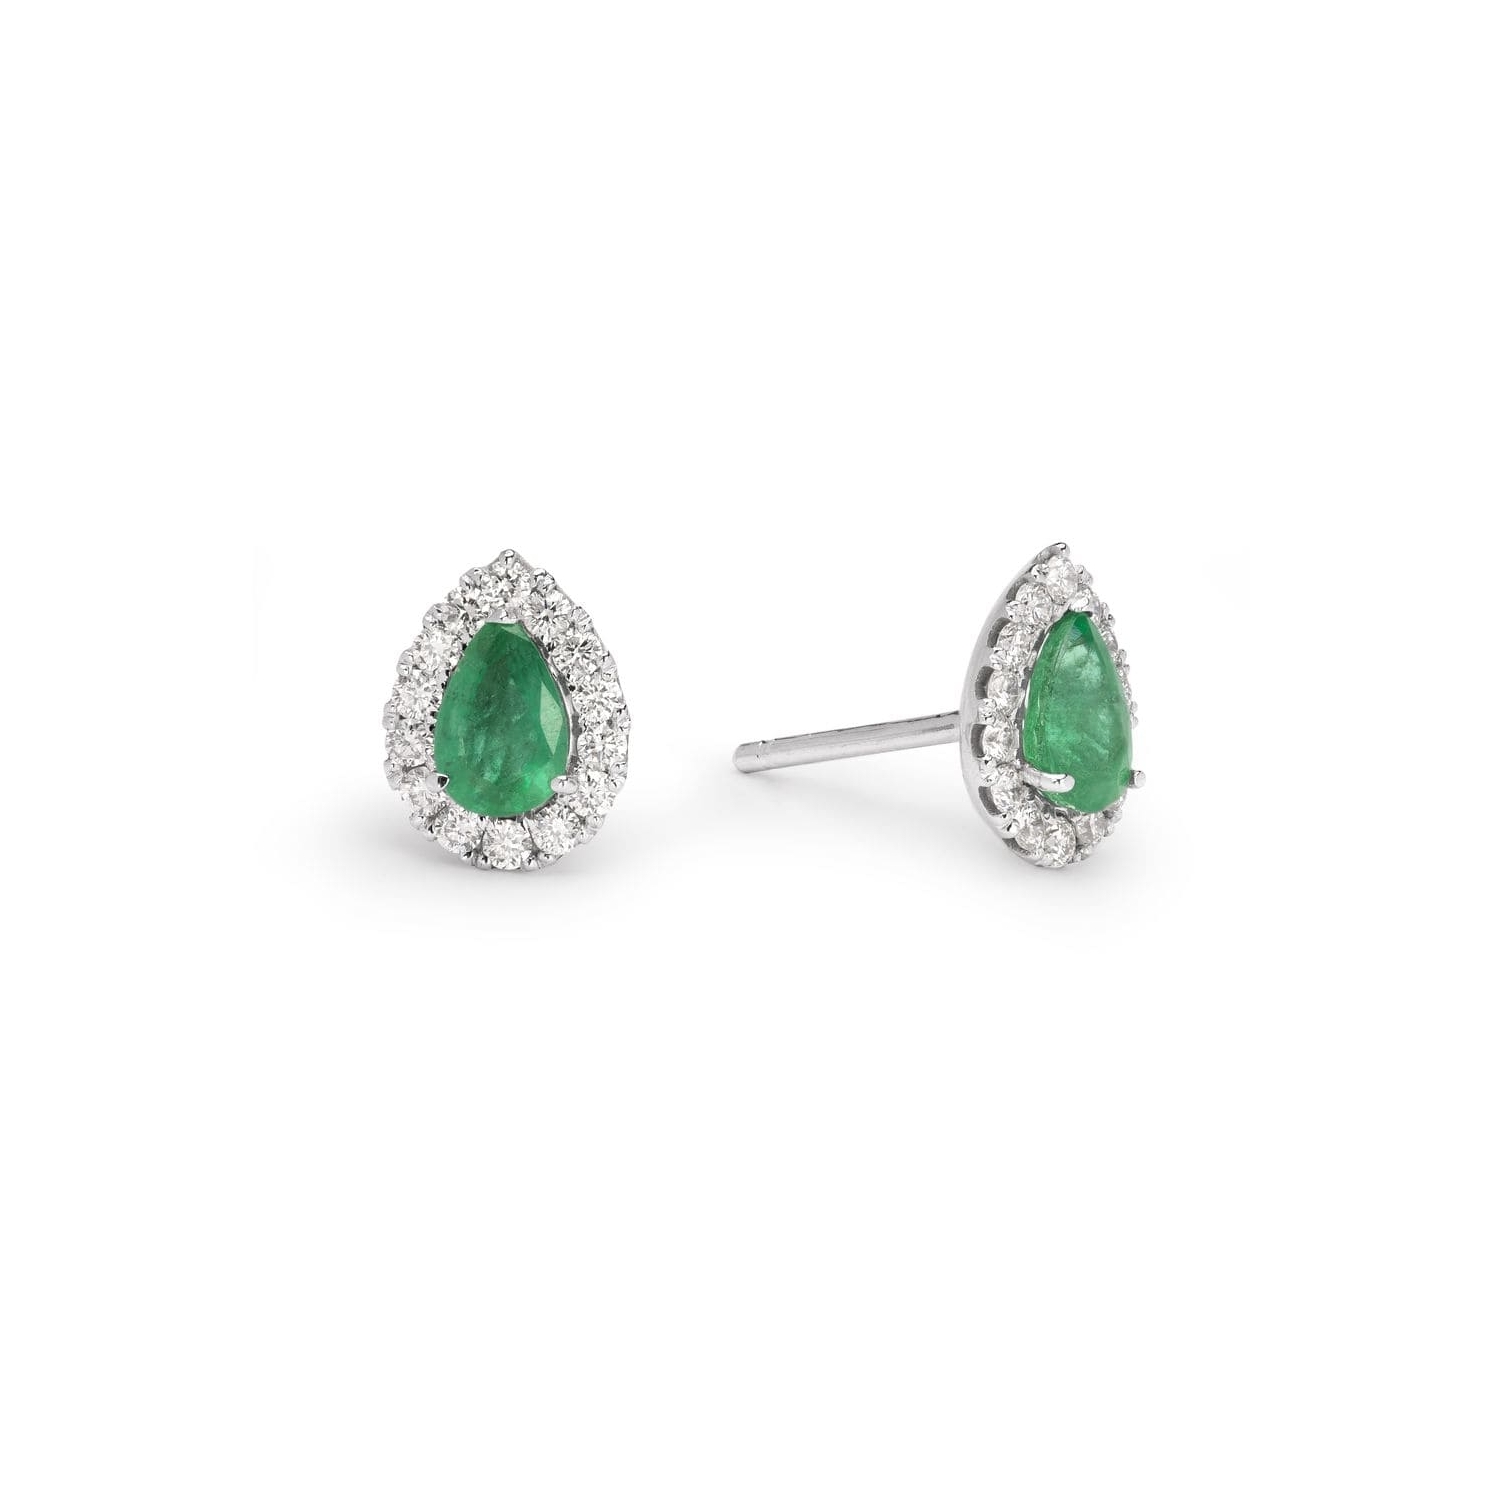 Gold earrings with gemstones "Emerald 19"